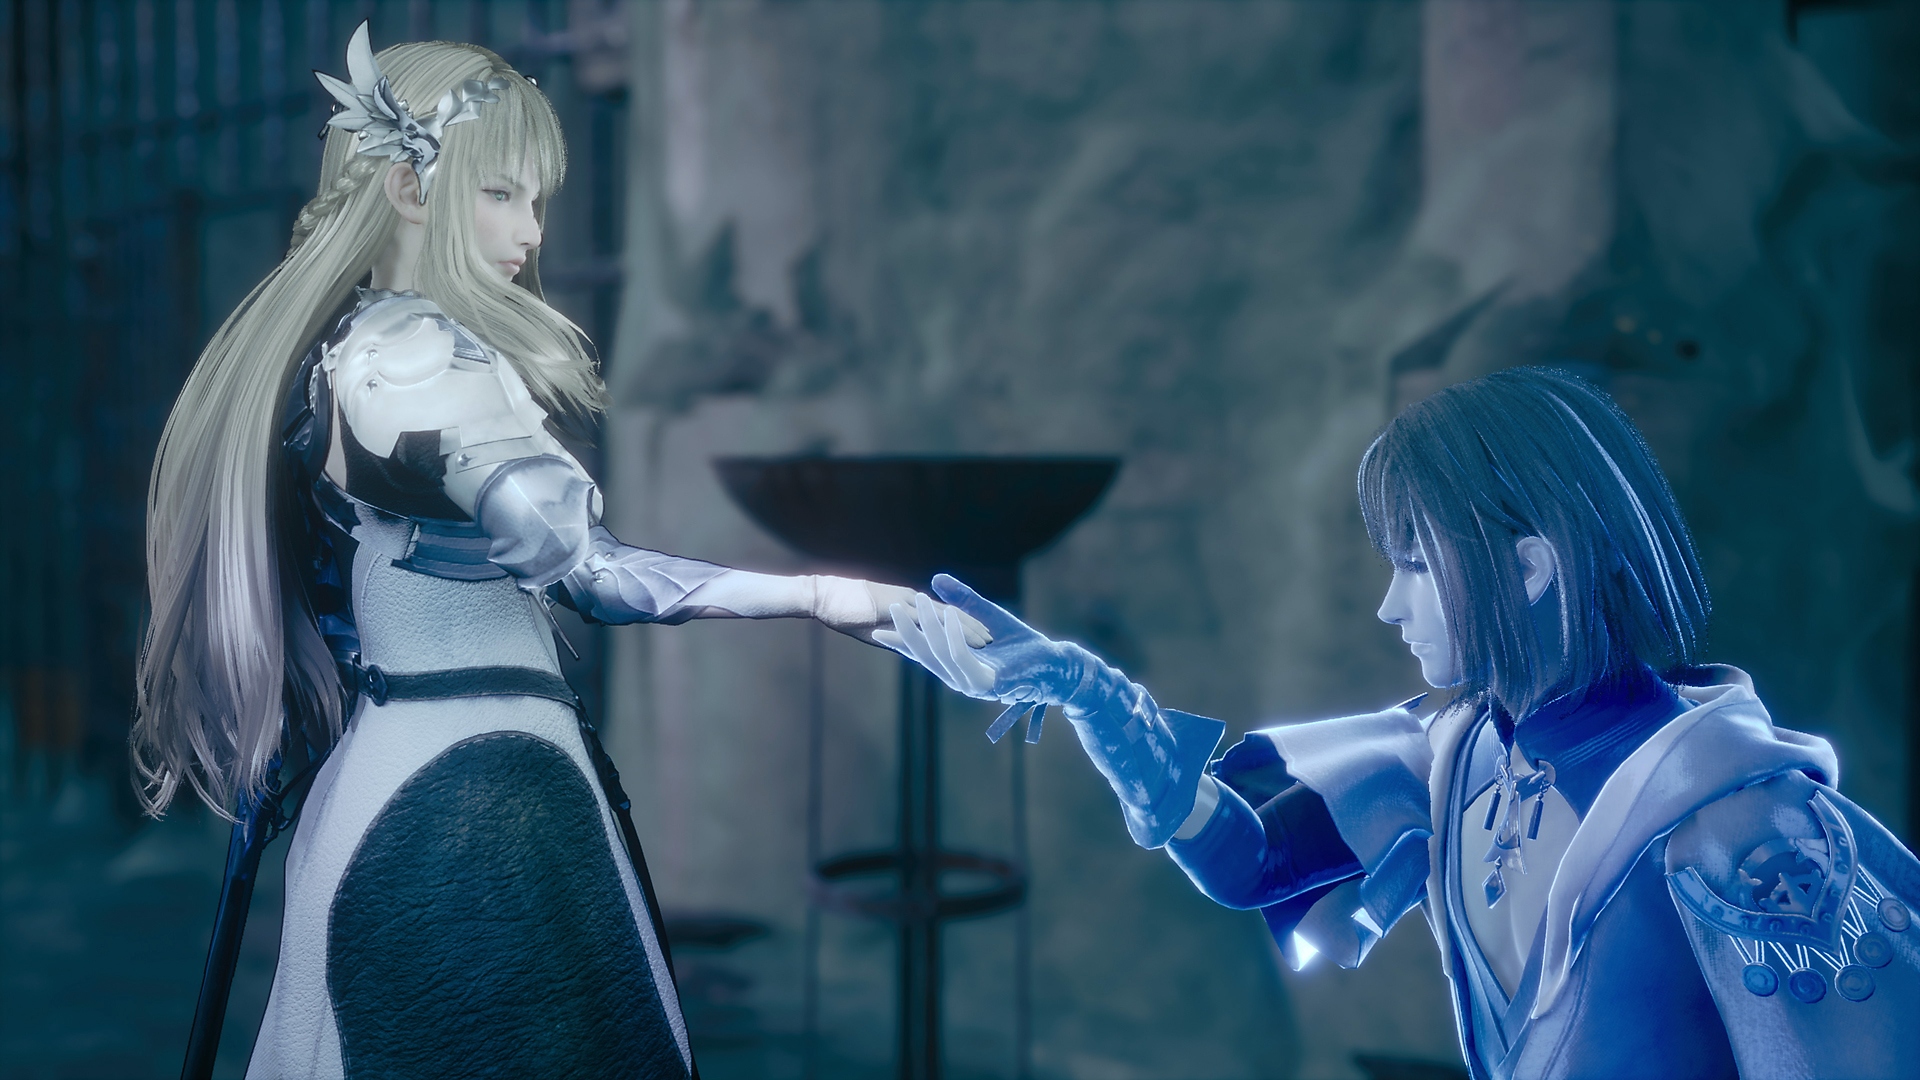 Valkyrie Elysium screenshot showing a blue glowing knight kneeling in front of a princess character